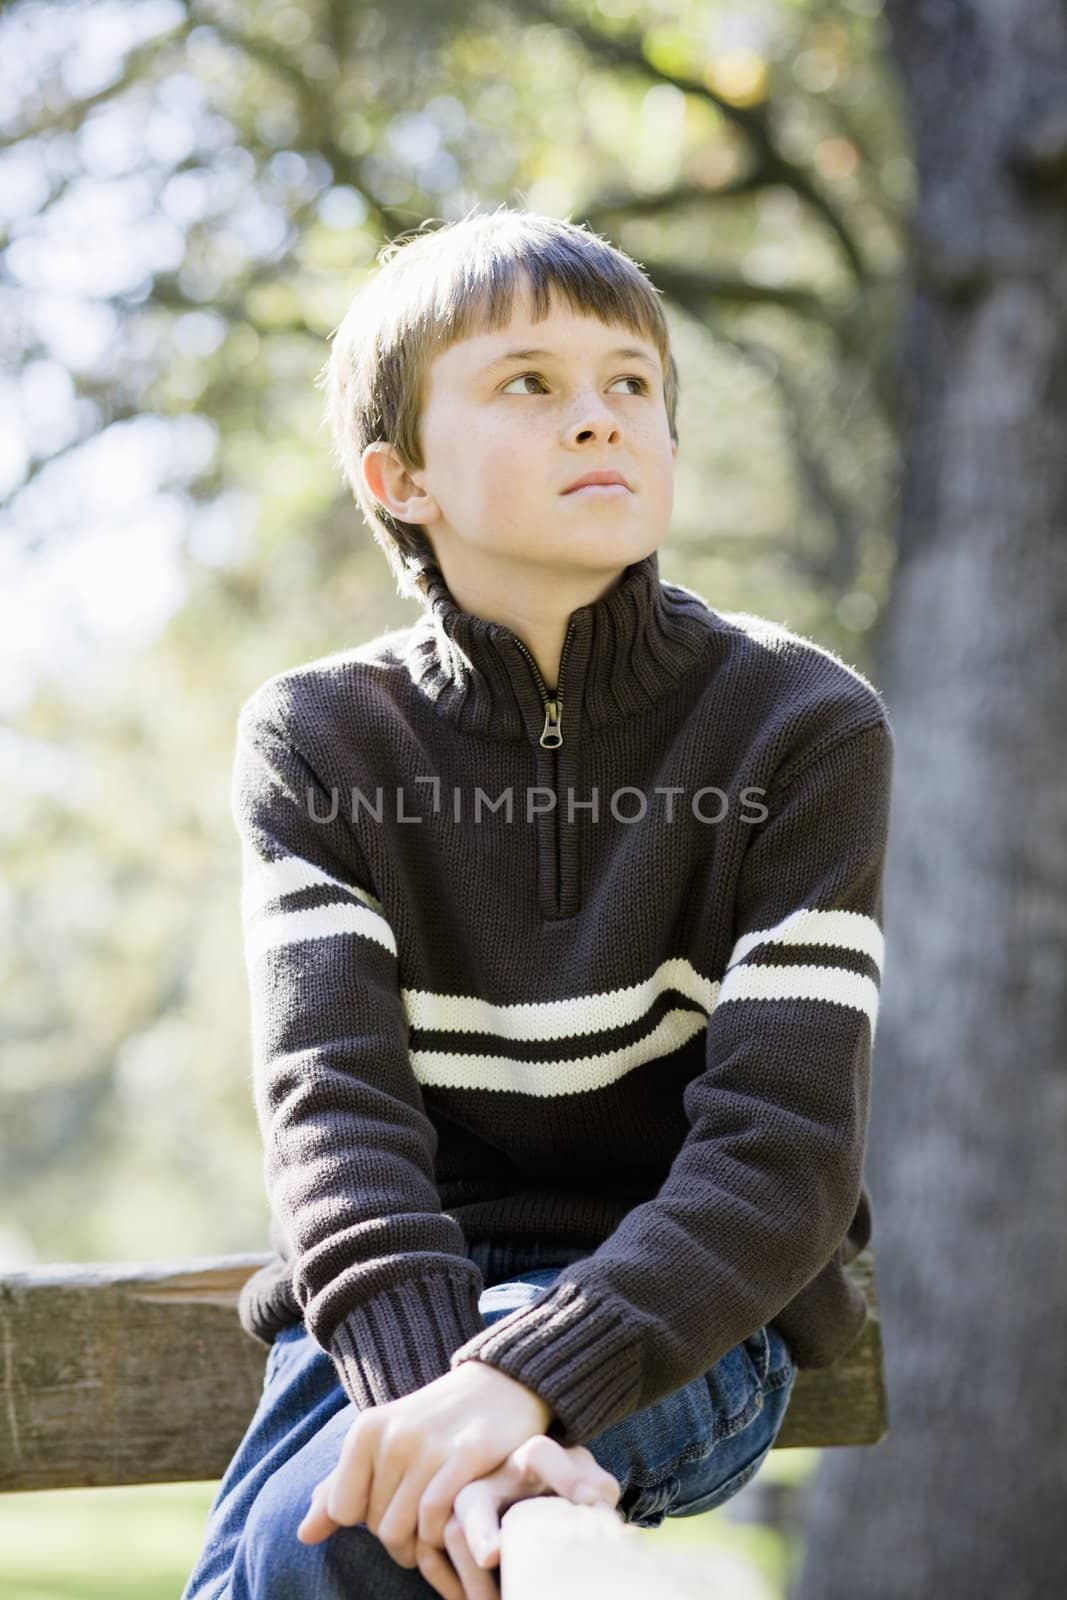 Portrait of a Cute Young Boy Sitting on a Wooden Railing Looking Away From Camera